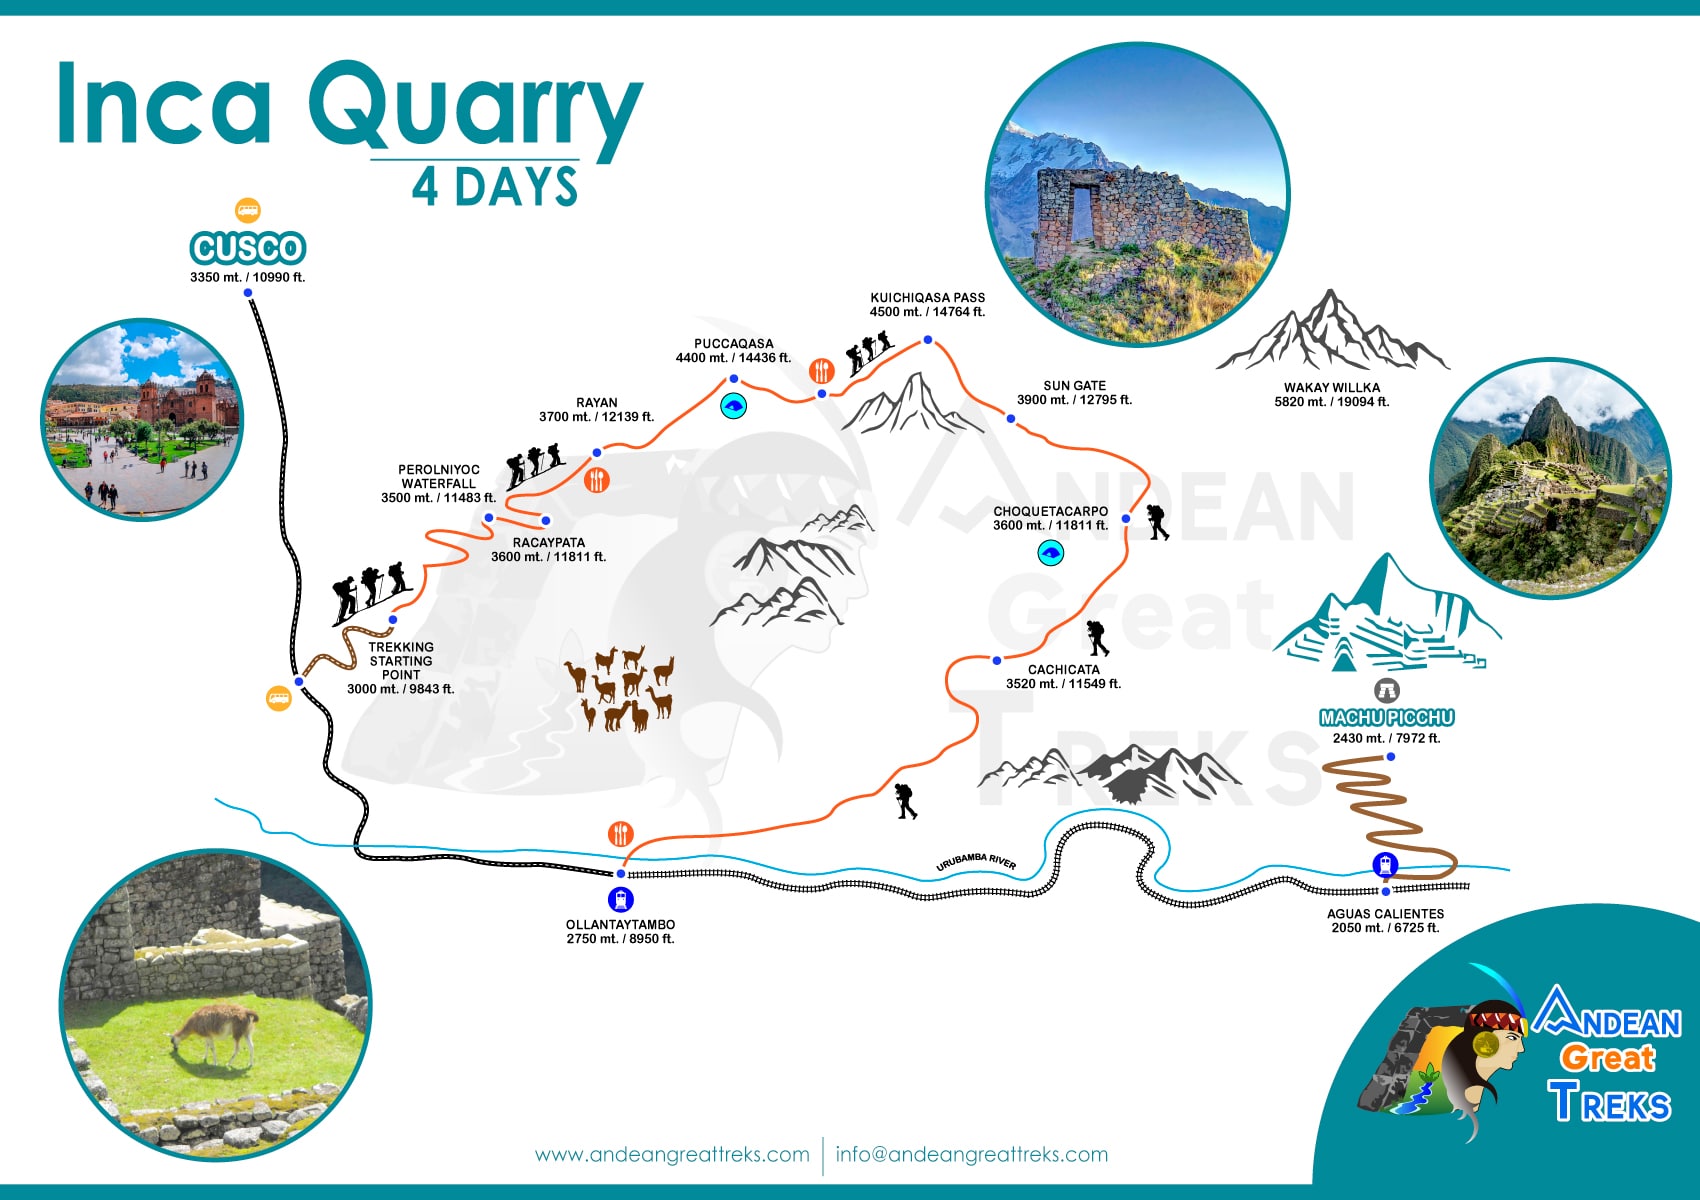 inca quarry trail 4 days by andean great treks